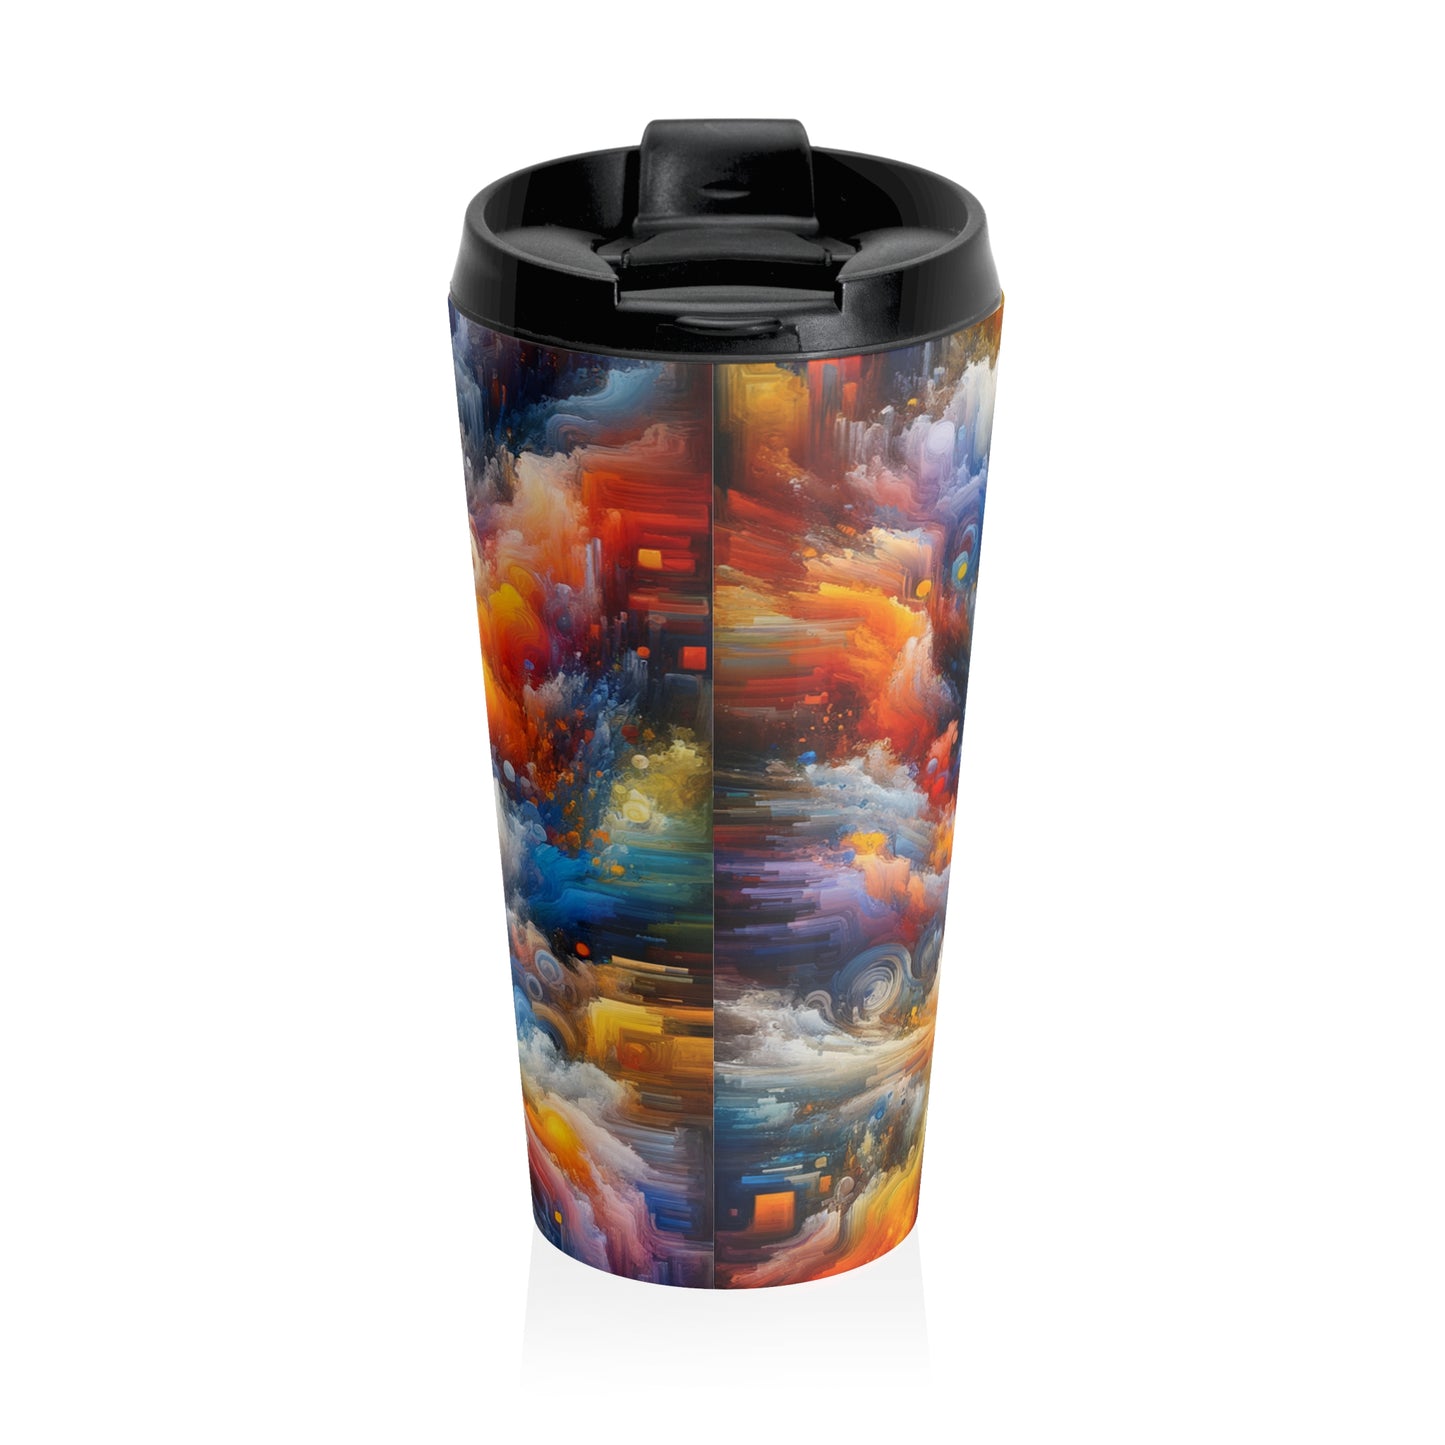 "Vibrant Chaos". - The Alien Stainless Steel Travel Mug Abstract Expressionism Style